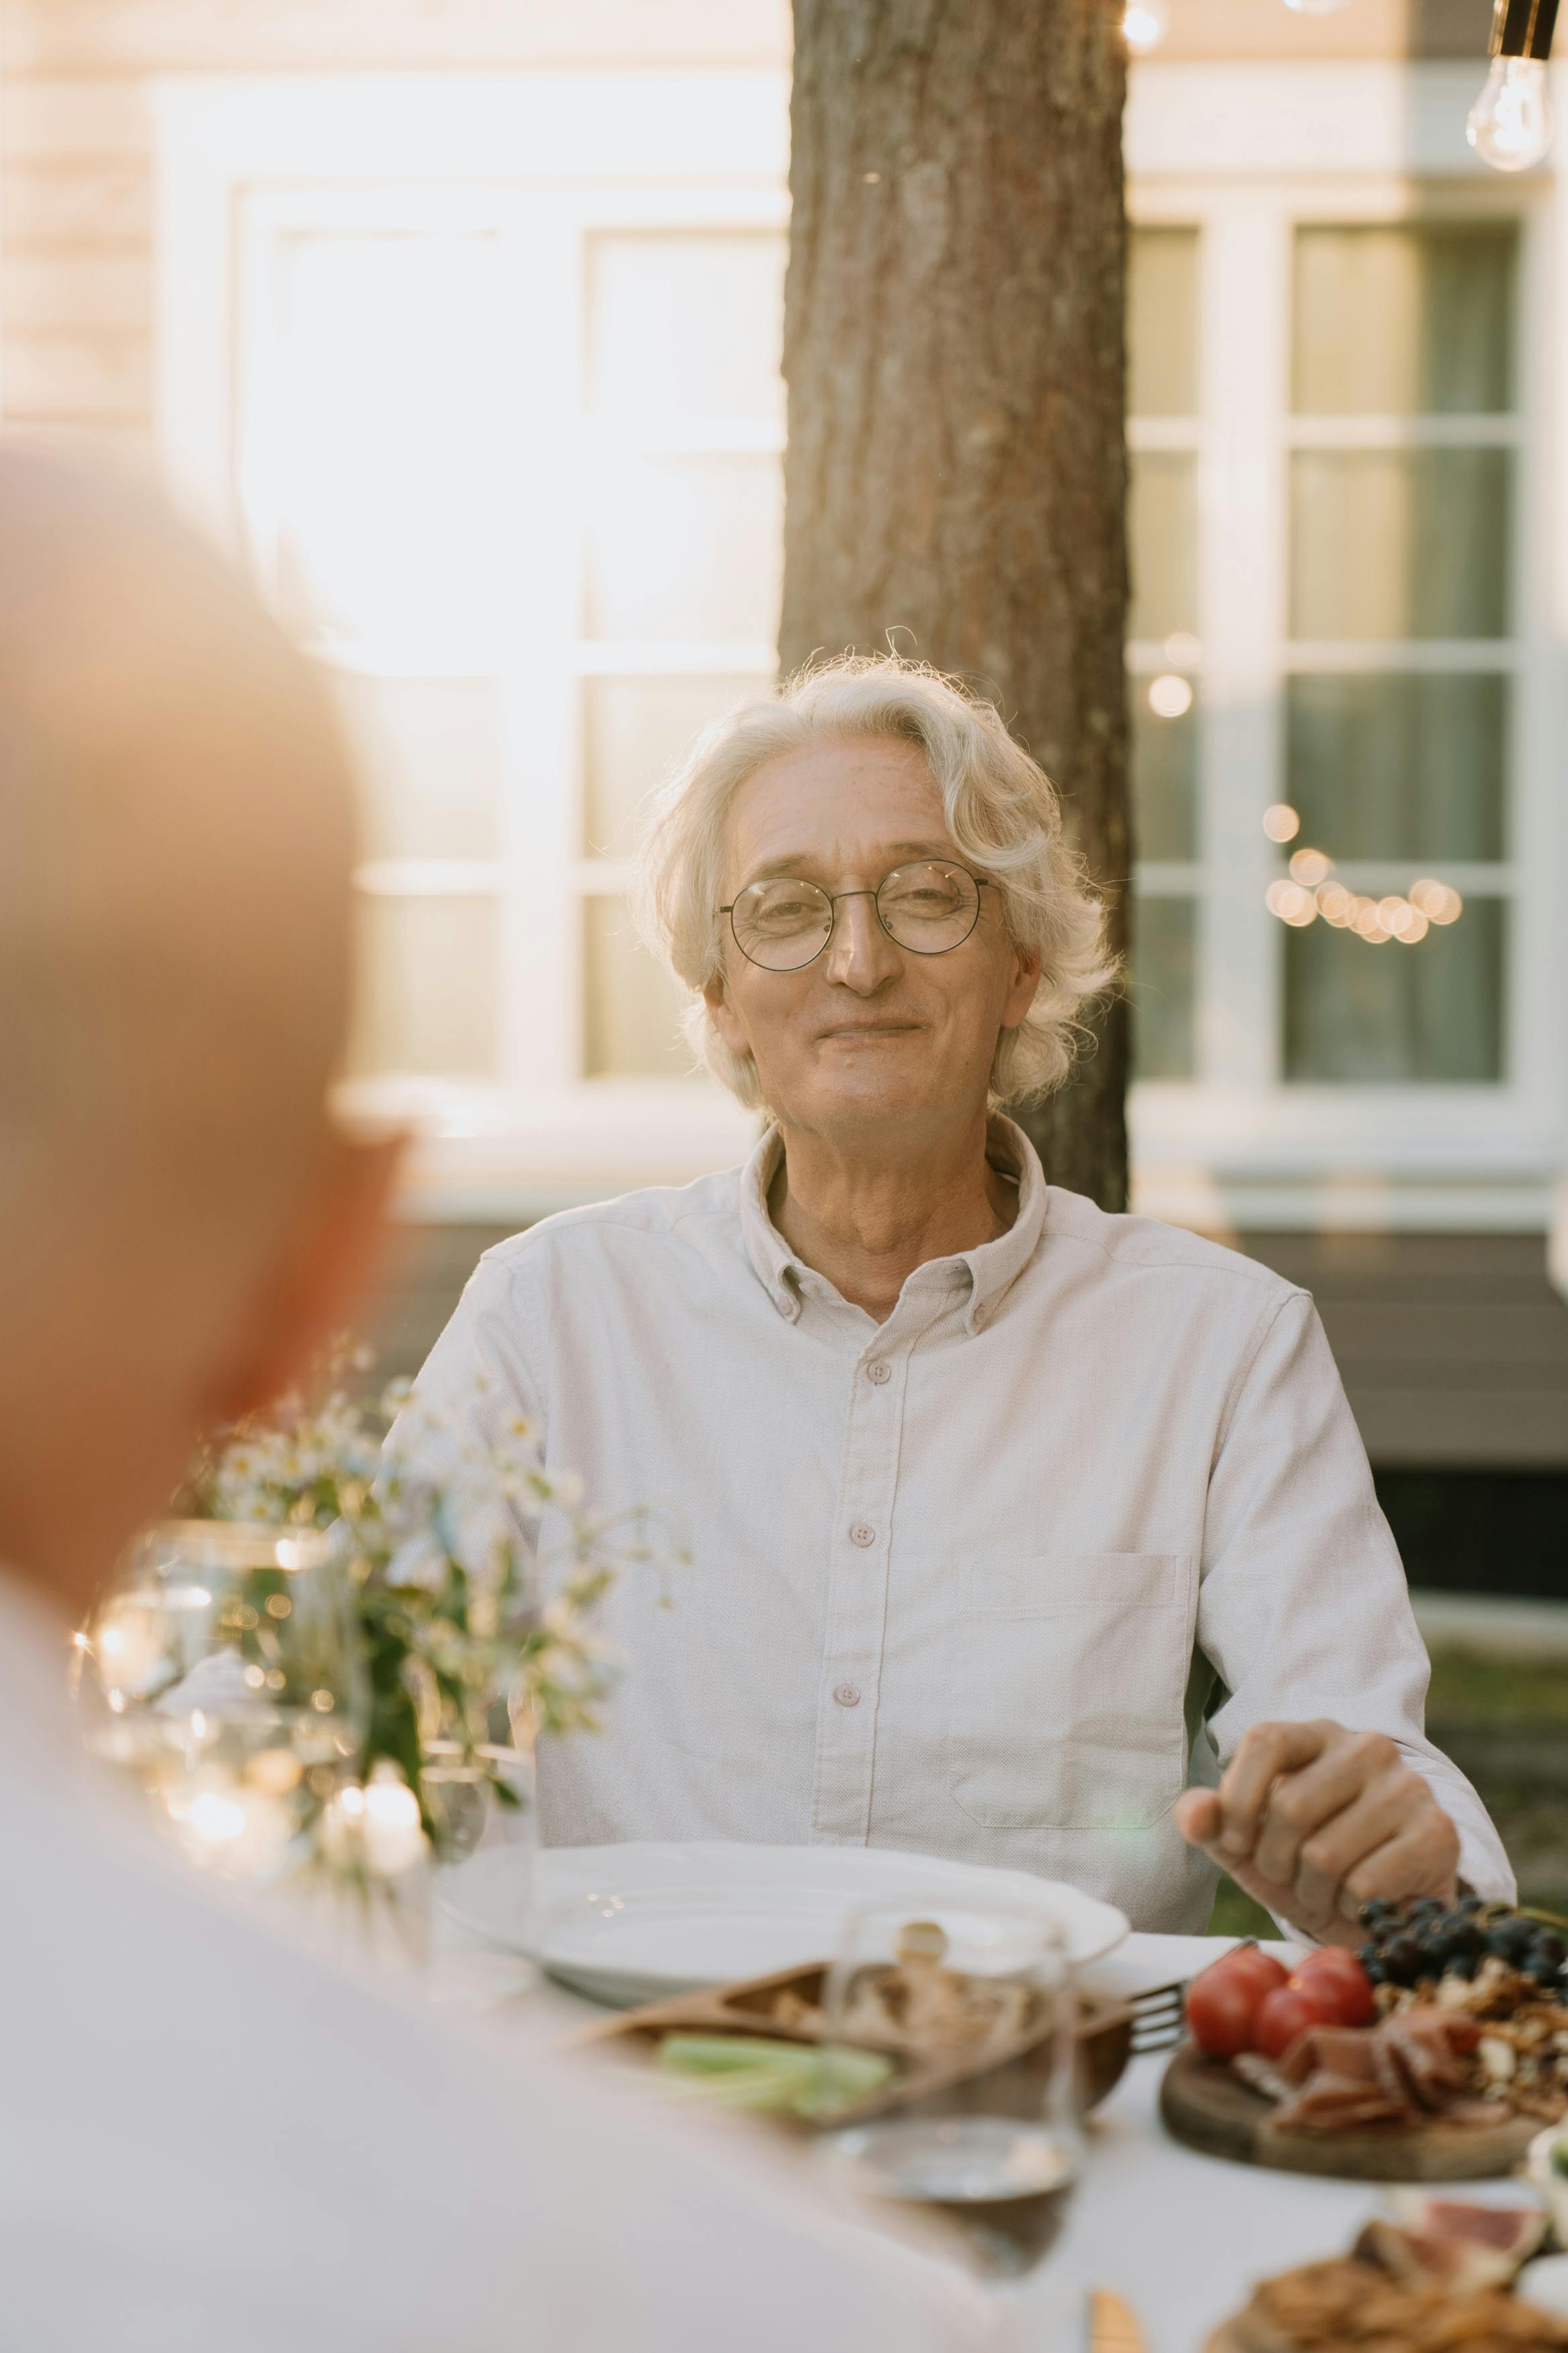 7 Simple Guidance Tips for Taking Care of the Elderly at Home